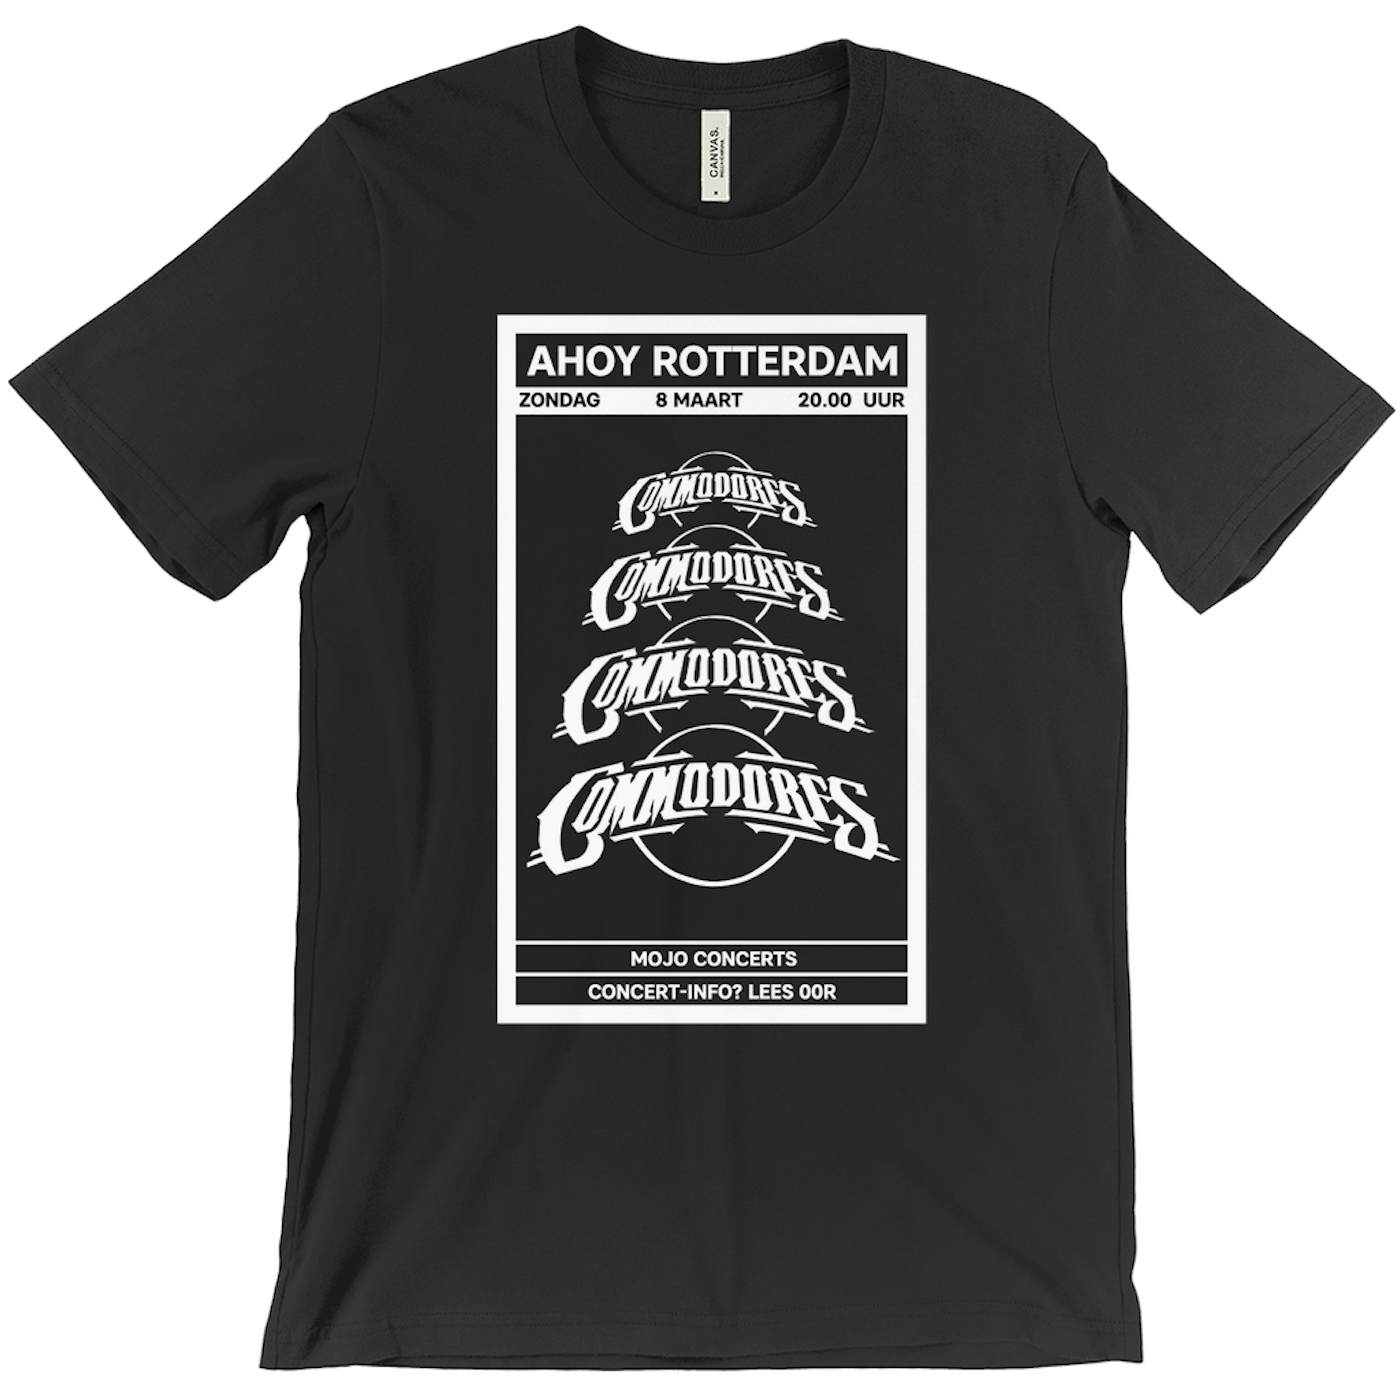 Commodores March 1992 Ahoy Rotterdam Vintage T-Shirt